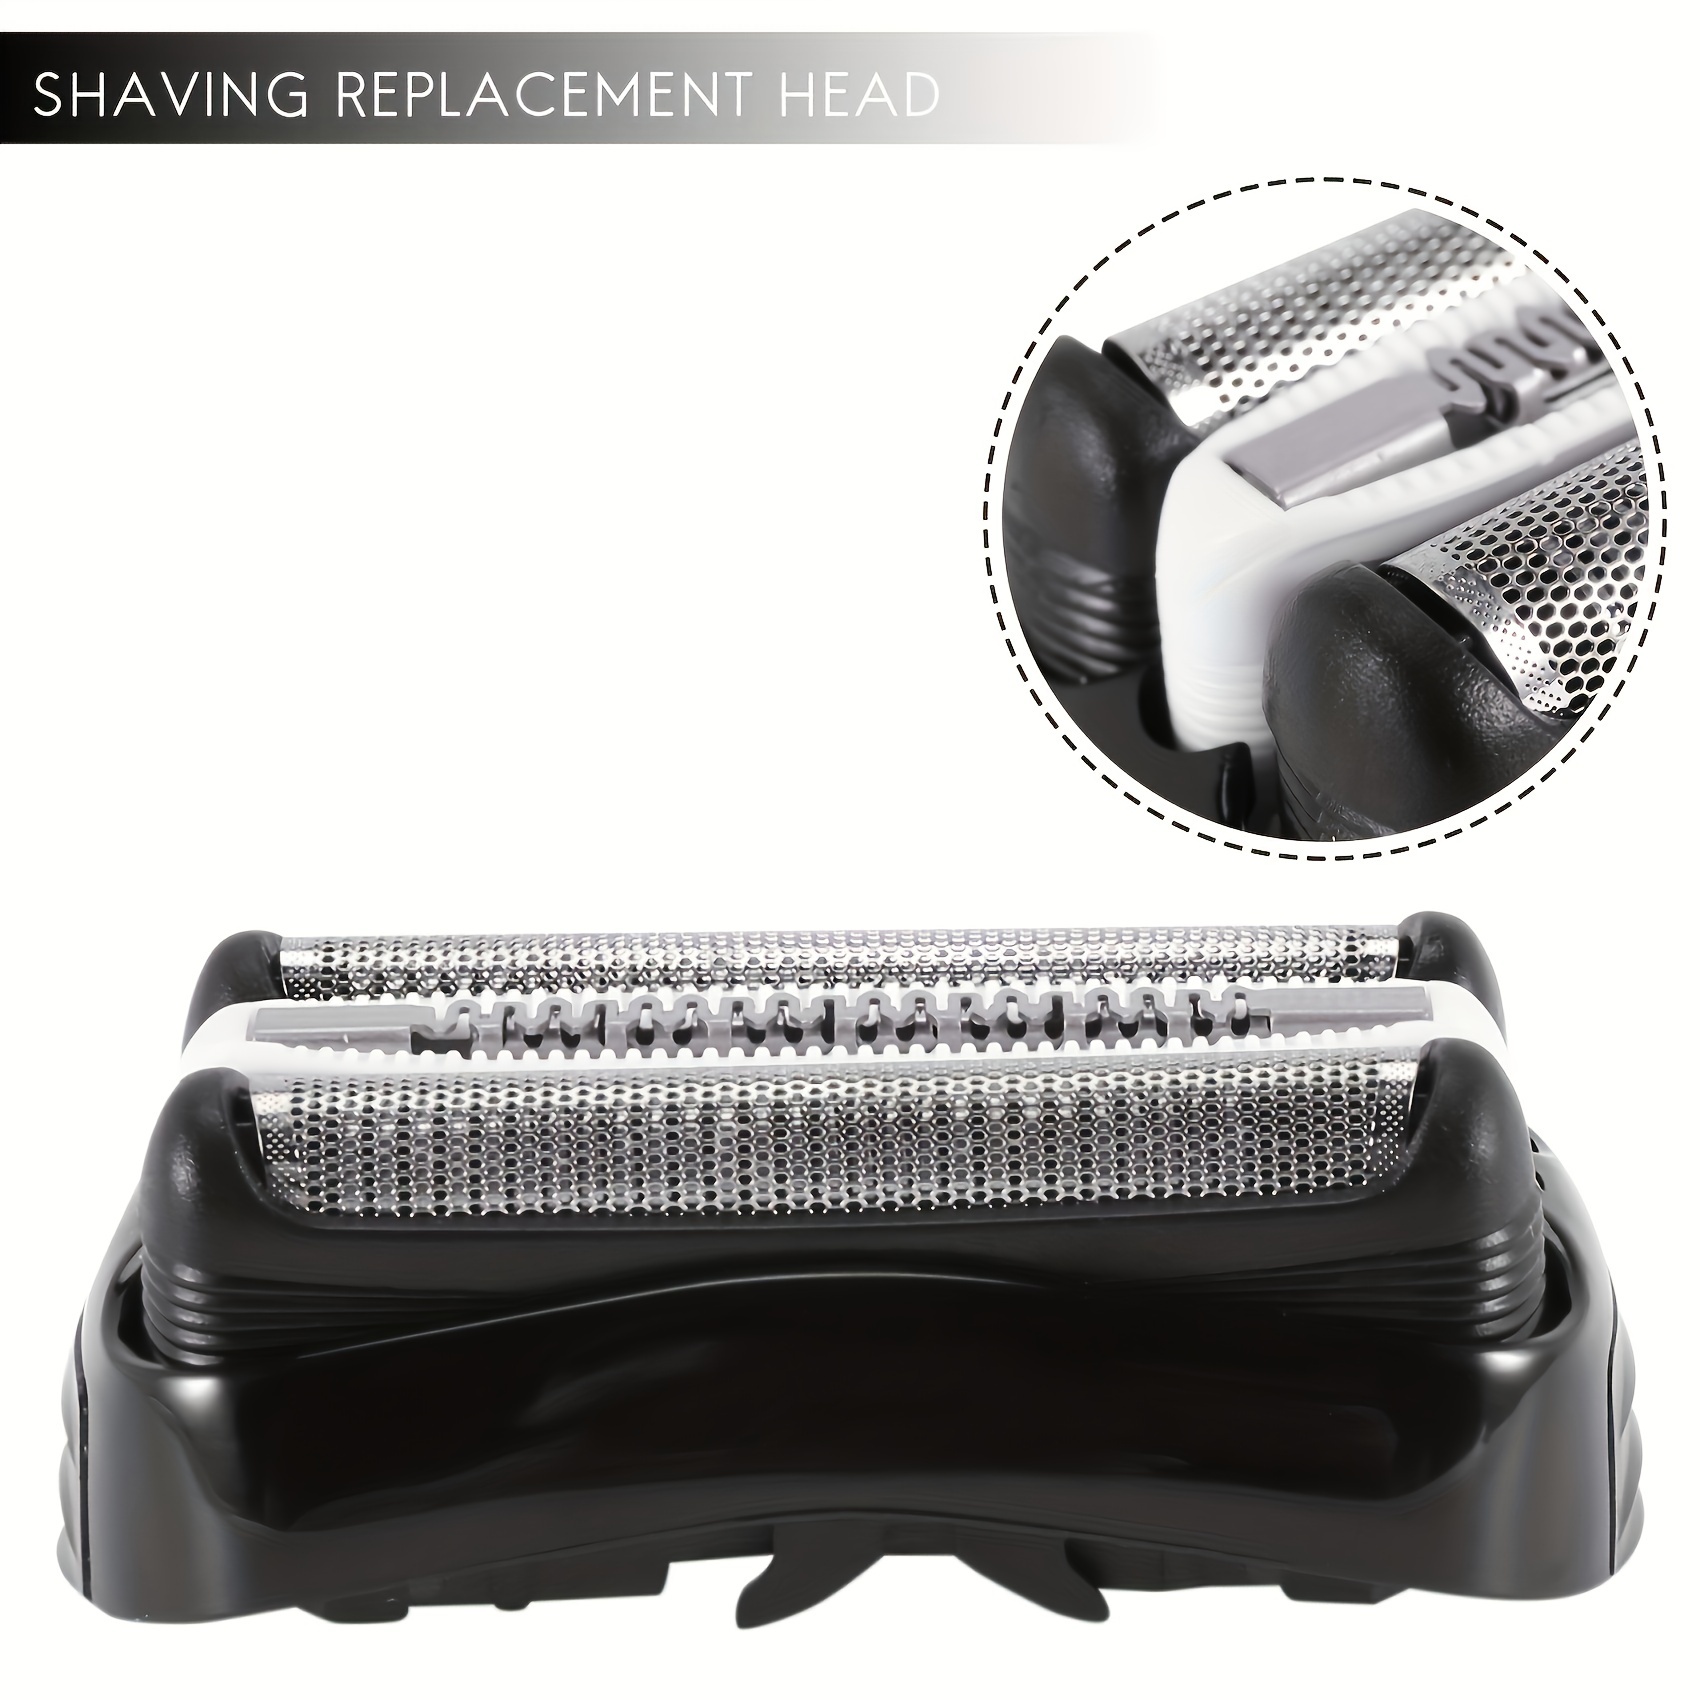 32B Series 3 Replacement Head for Braun ProSkin Electric Shaver, Compatible  with Braun Foil Shaver 3000s 3010s 3020s 3030s 3040s 3050cc 3070cc 3080s